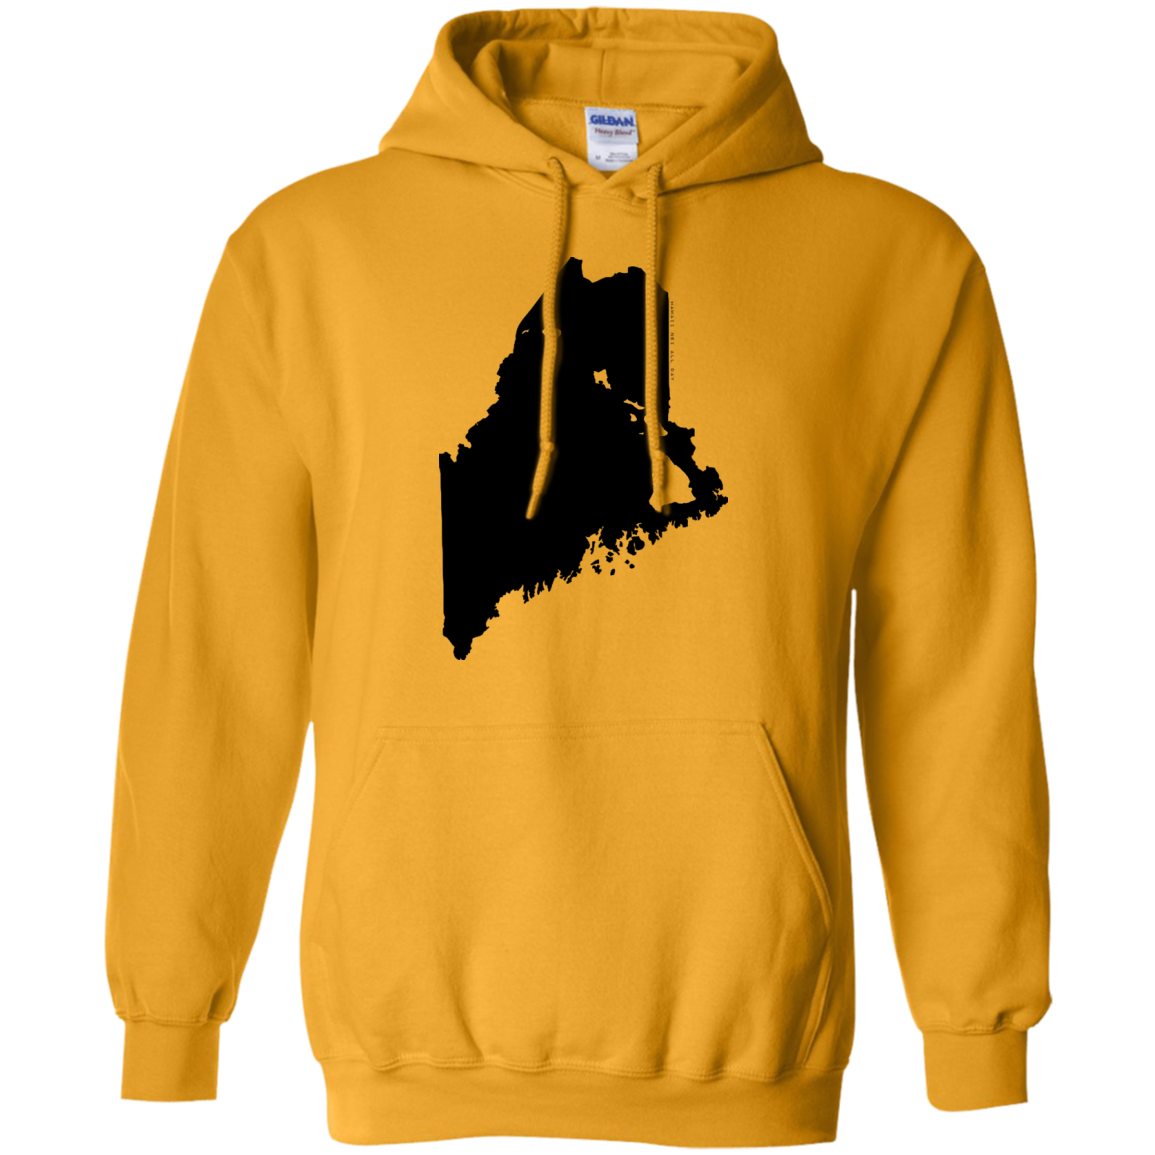 Living in Maine with Hawaii Roots Pullover Hoodie 8 oz., Sweatshirts, Hawaii Nei All Day